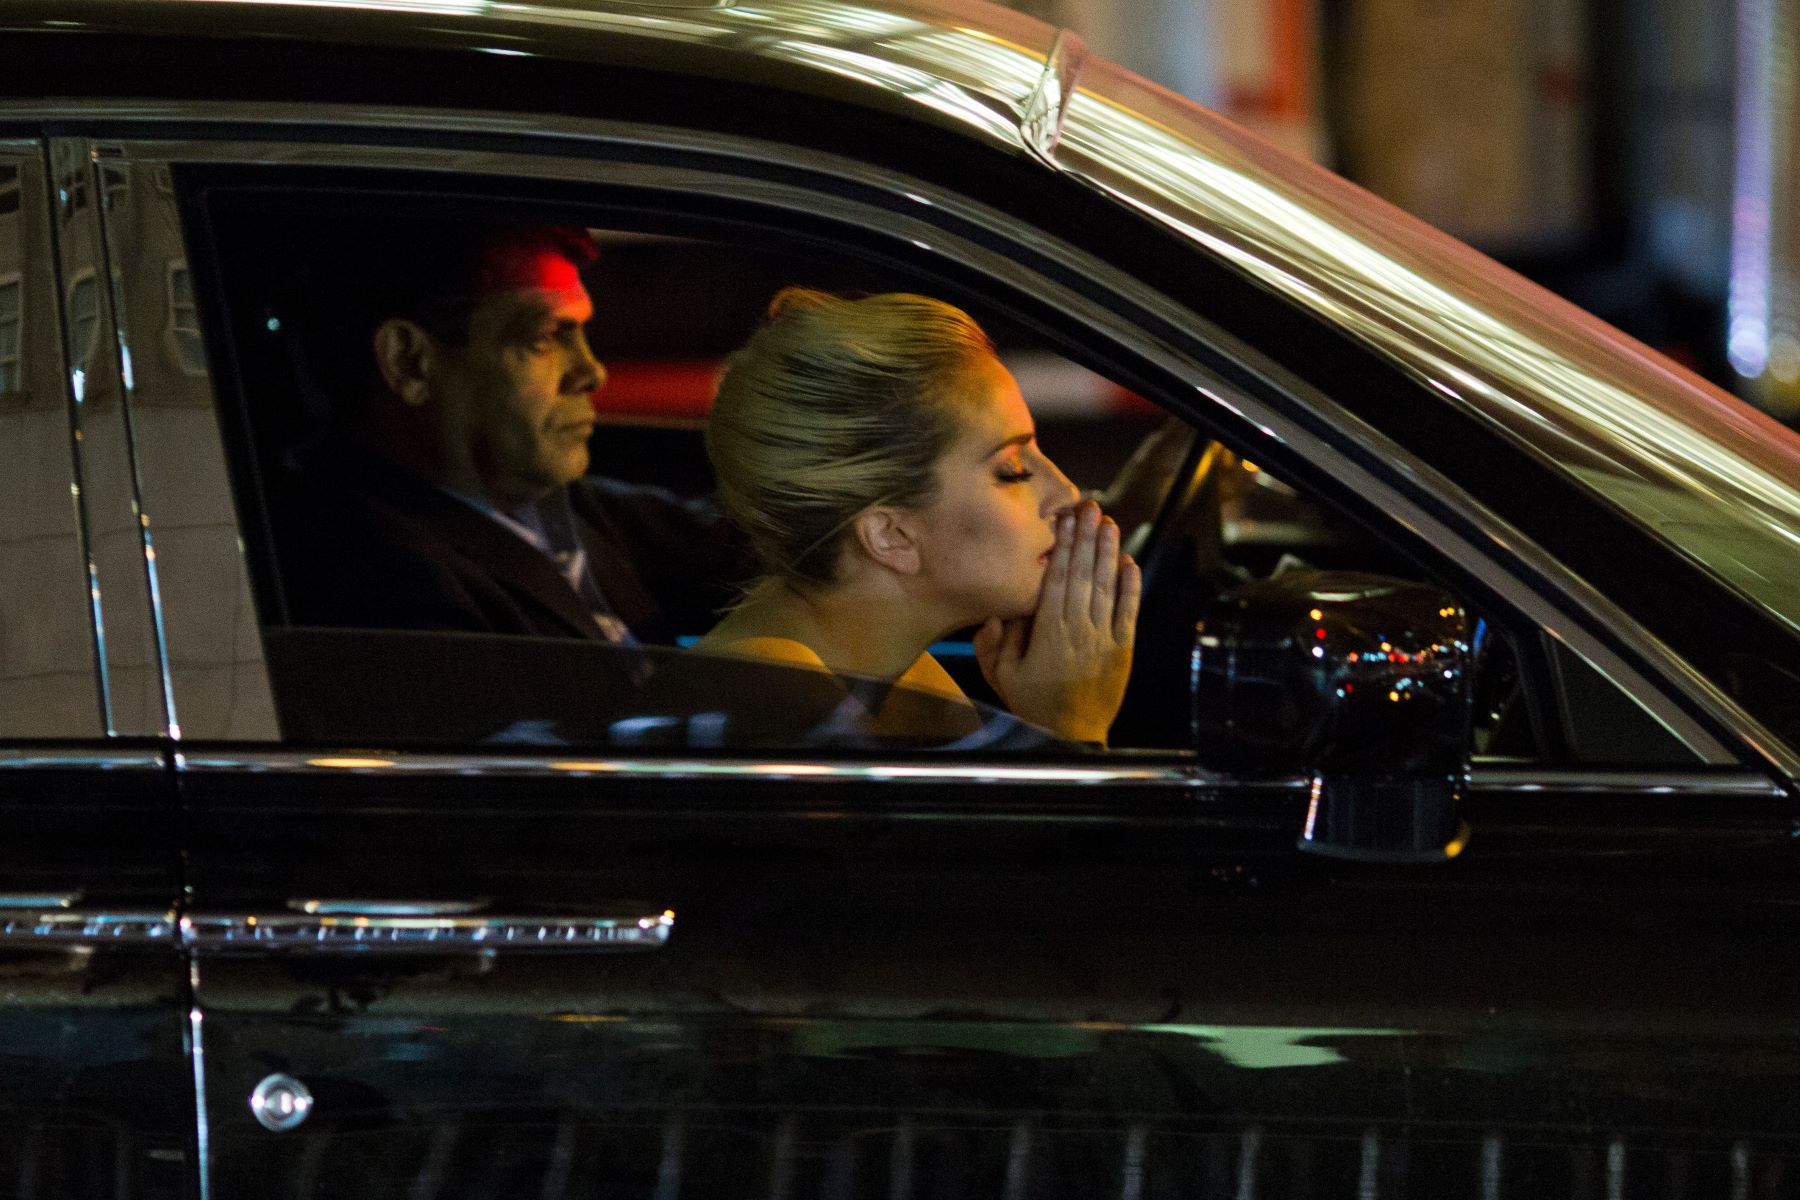 Lady Gage waiting in a car after a protest against Donald Trump in New York City